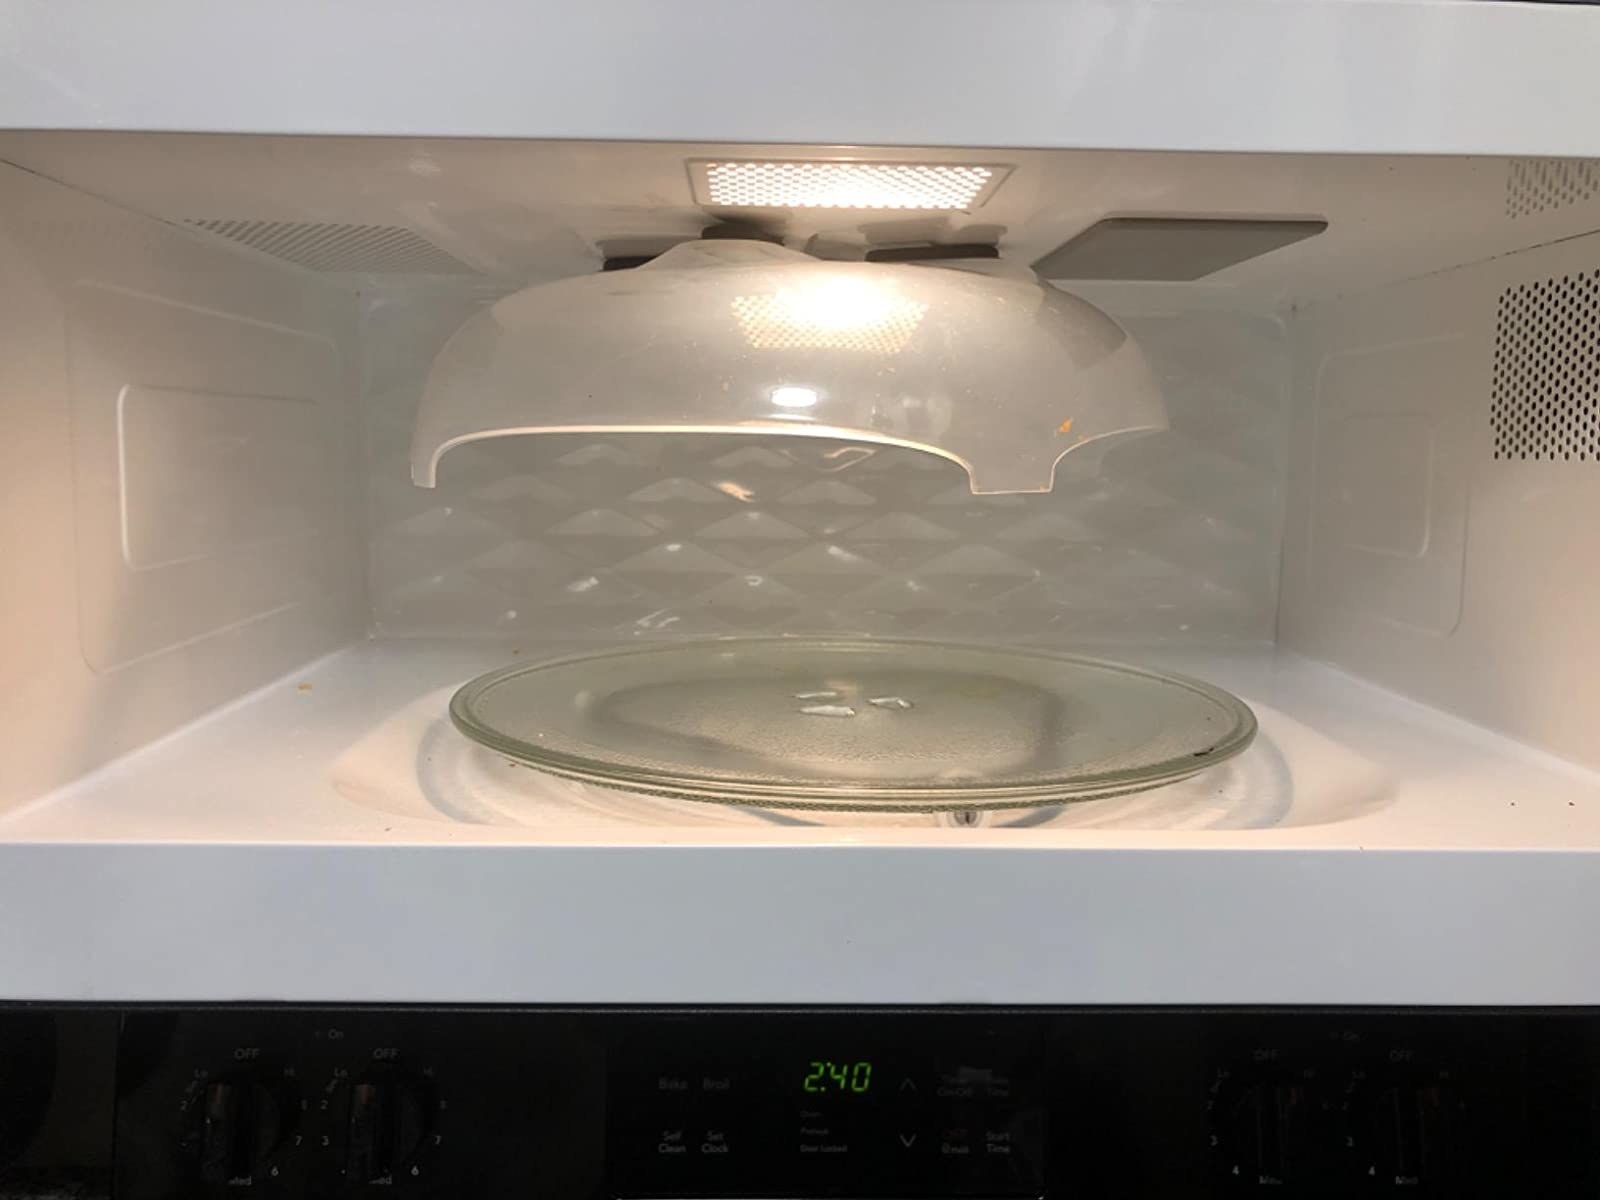 the cover magnetized to the top of a reviewer microwave